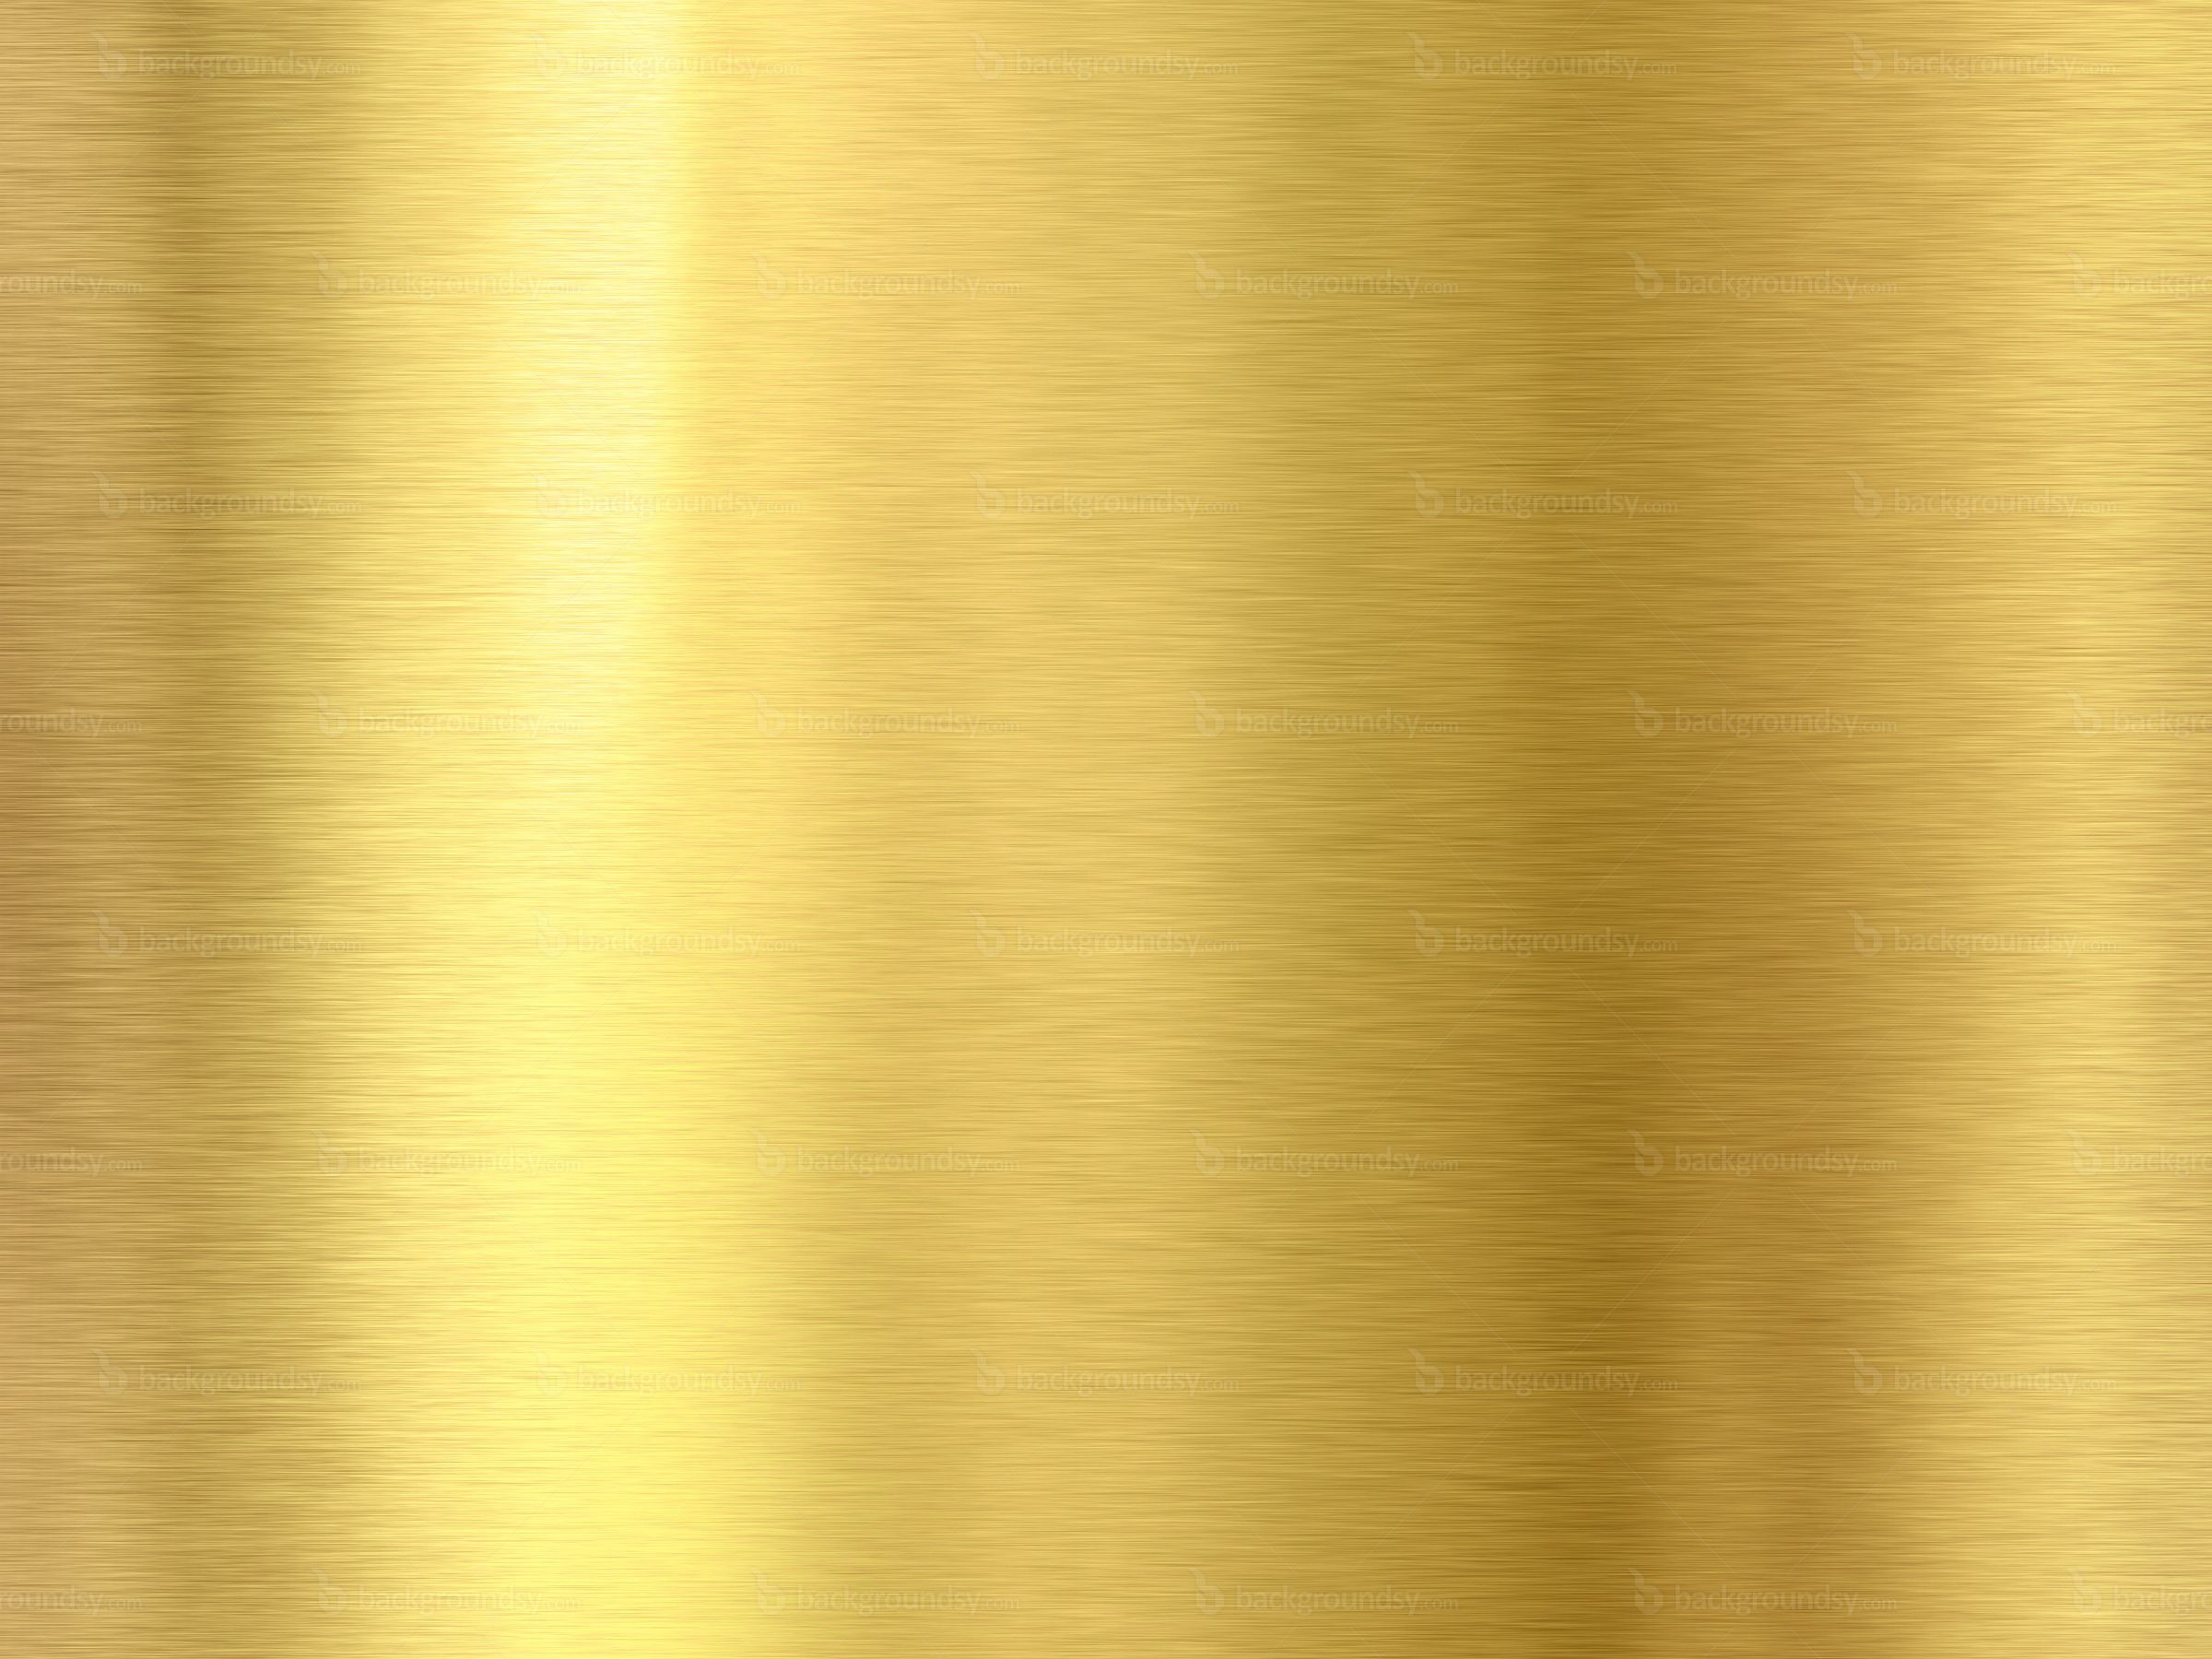 SALE Gold Papers and Textures. Gold Wallpapers Backgrounds - Etsy